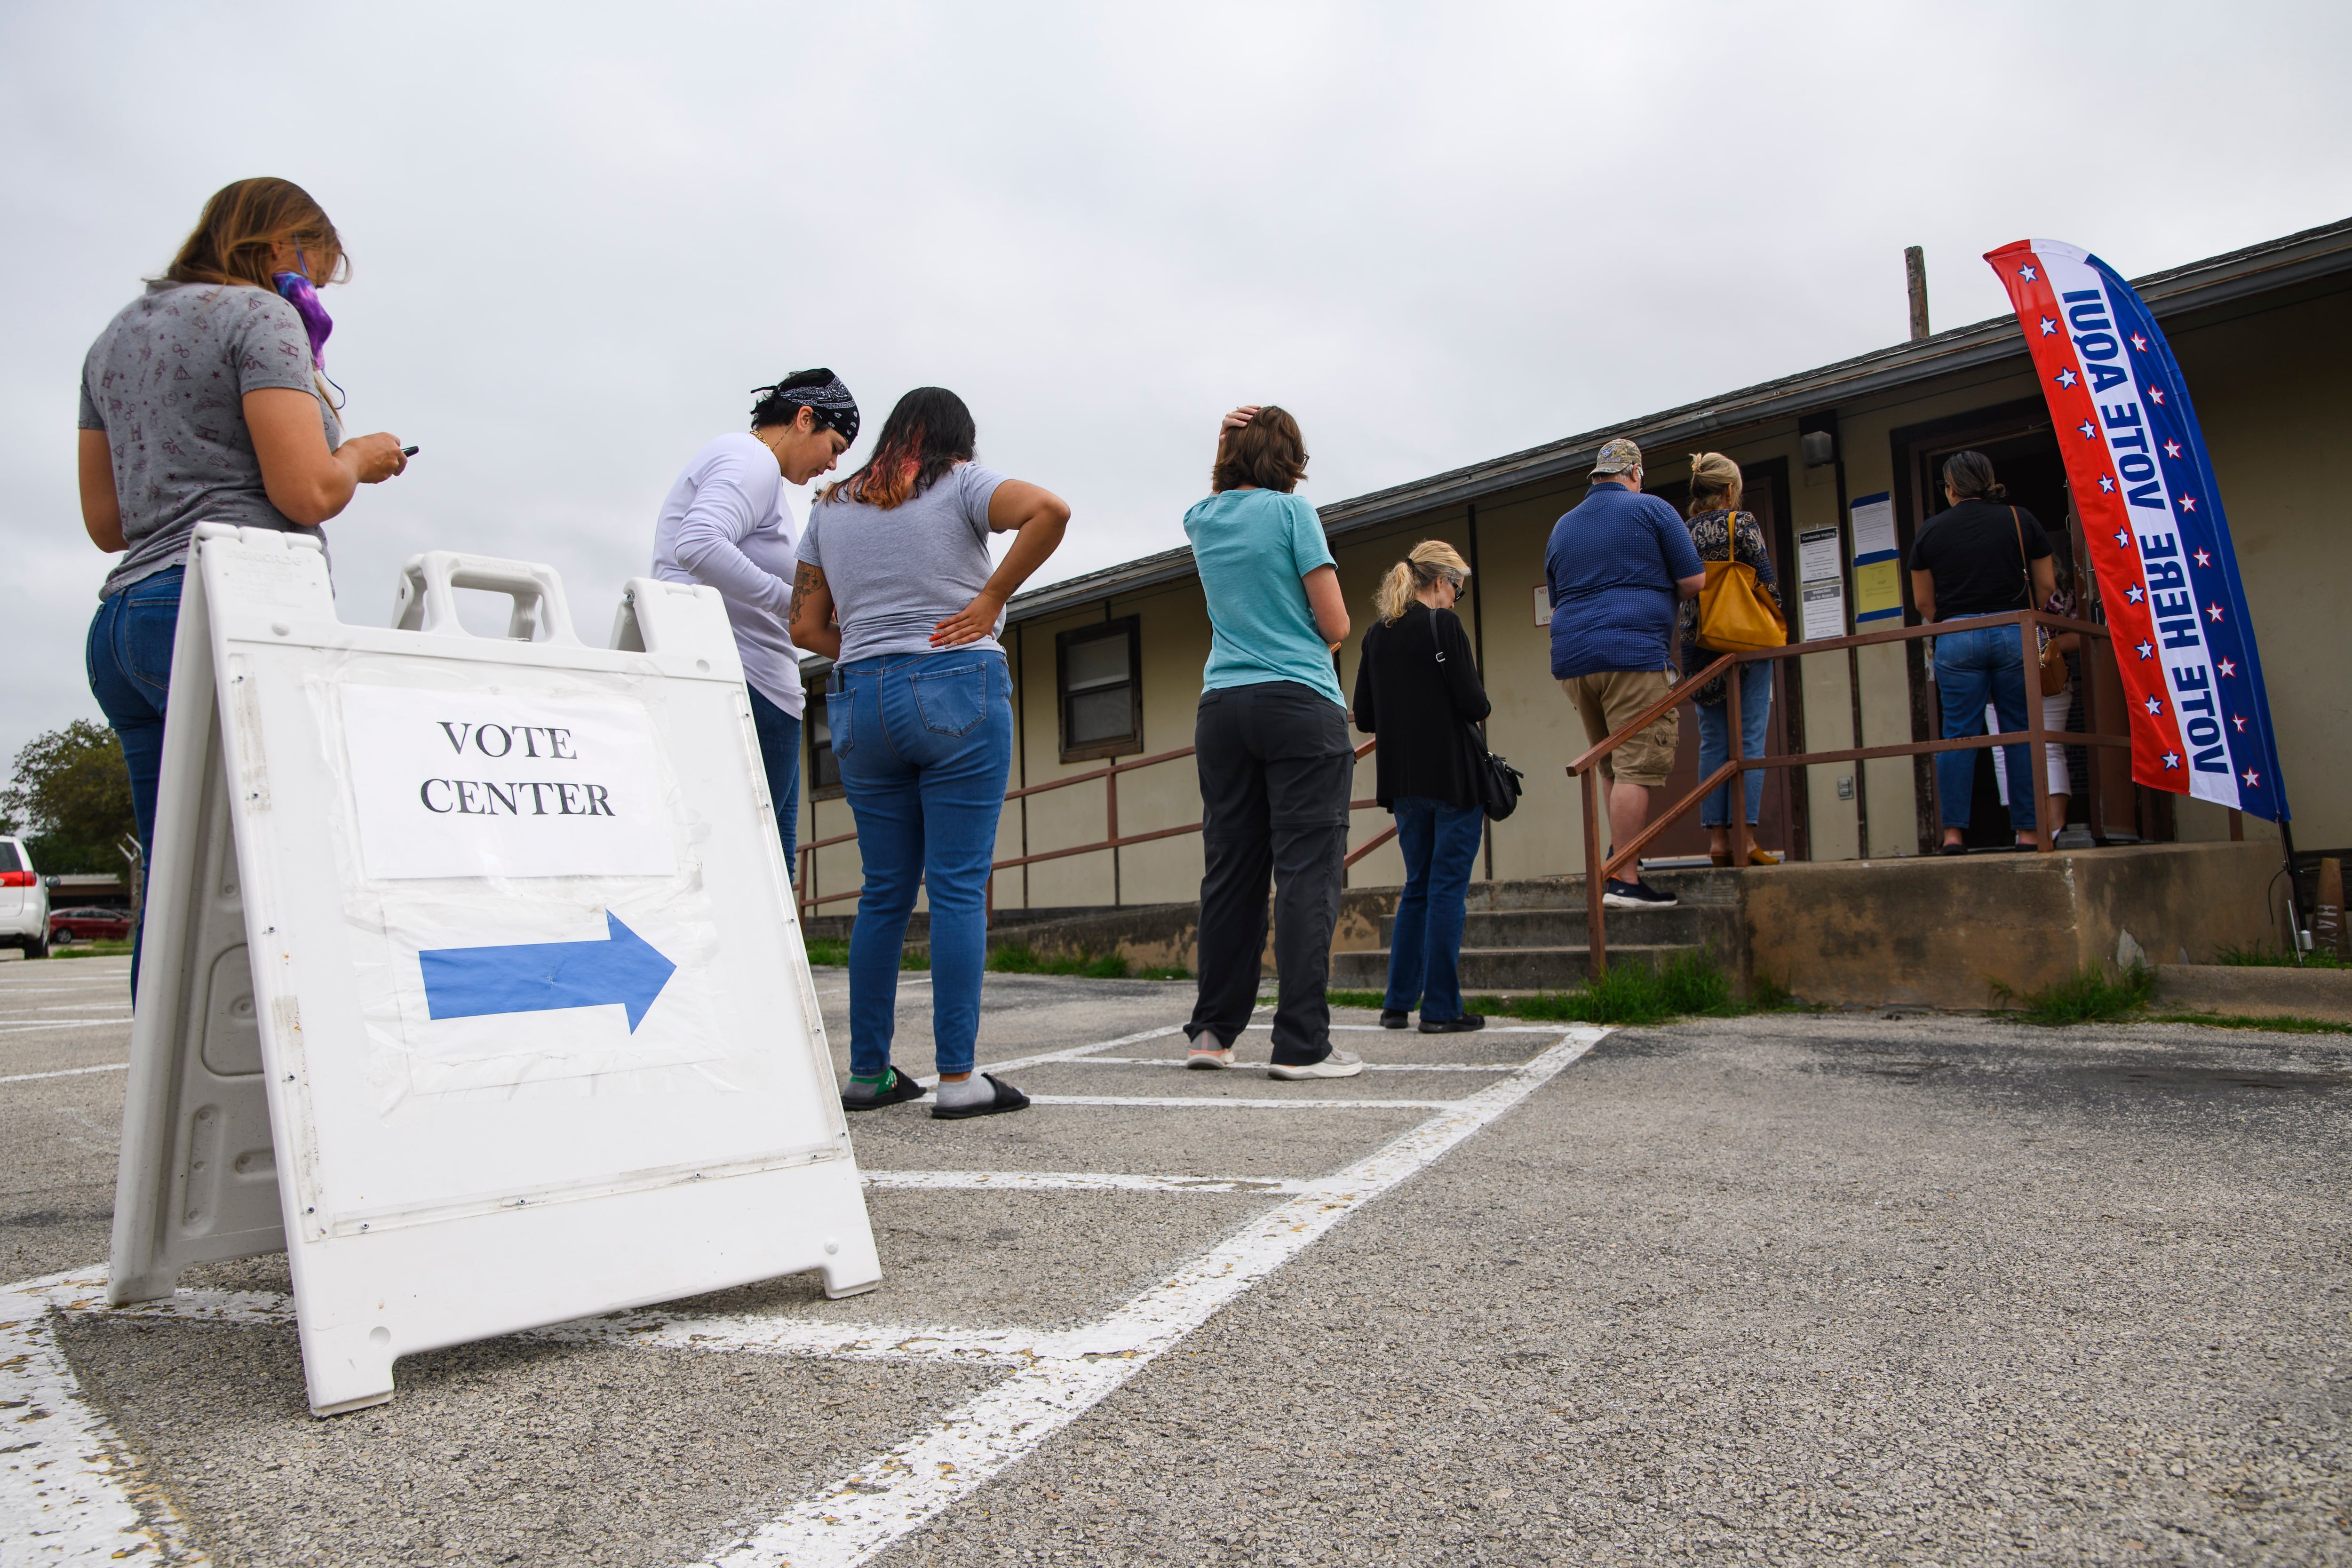 Several people stand in line in front of a building near a sign that says “vote center”